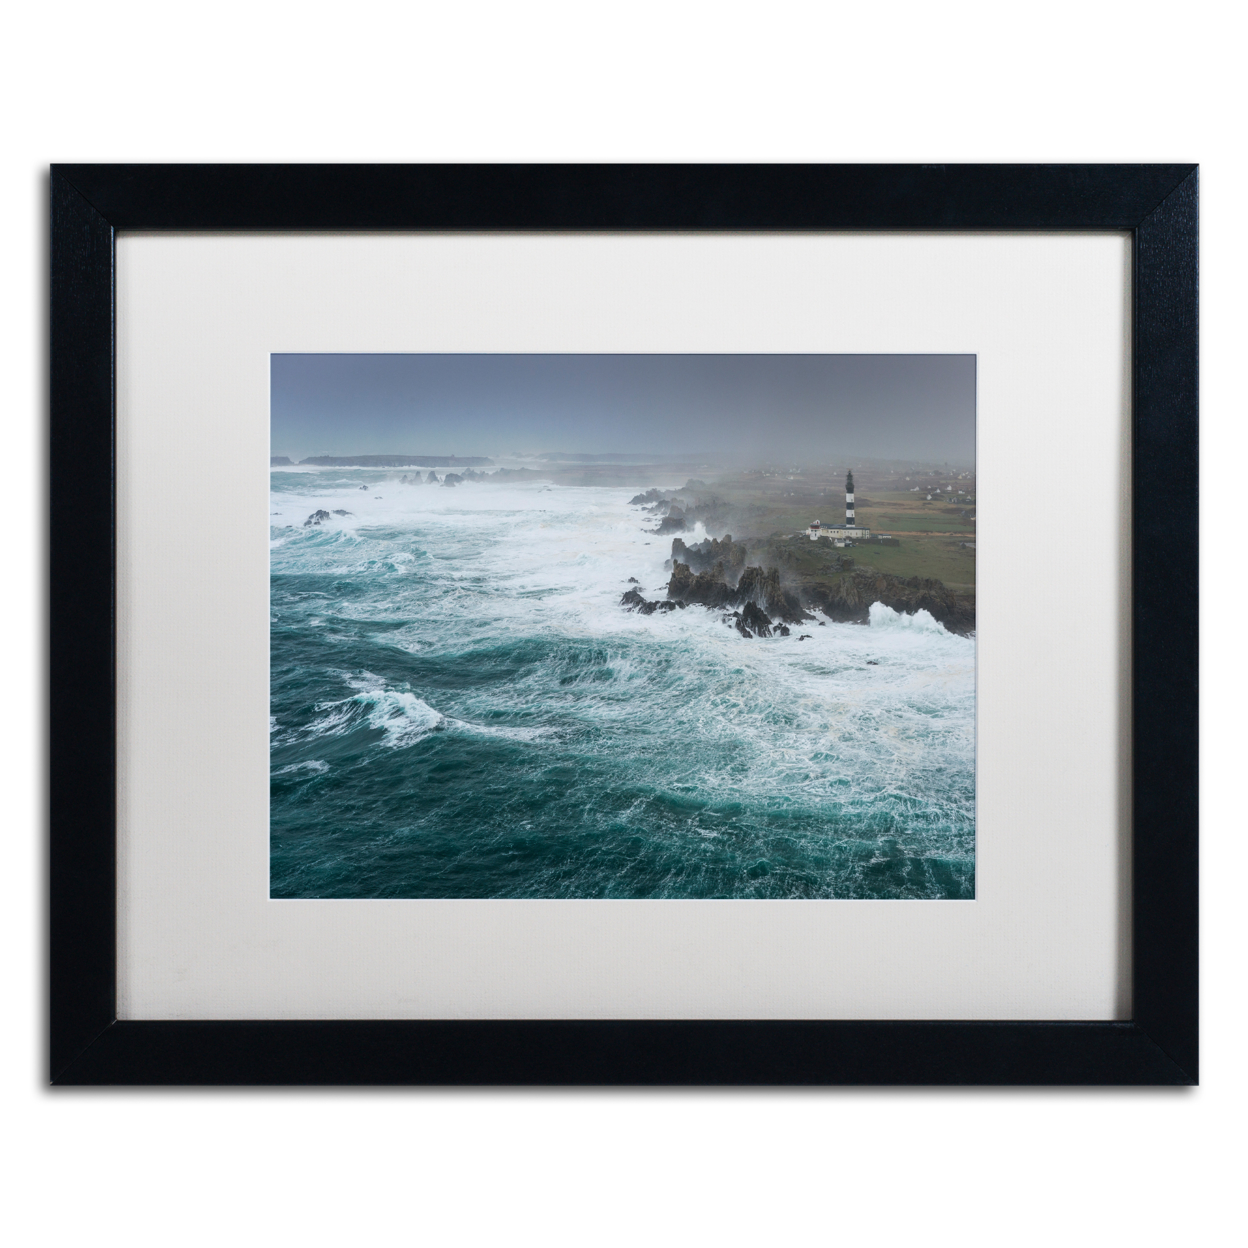 Mathieu Rivrin 'Storm Ruzica In Ouessant' Black Wooden Framed Art 18 X 22 Inches